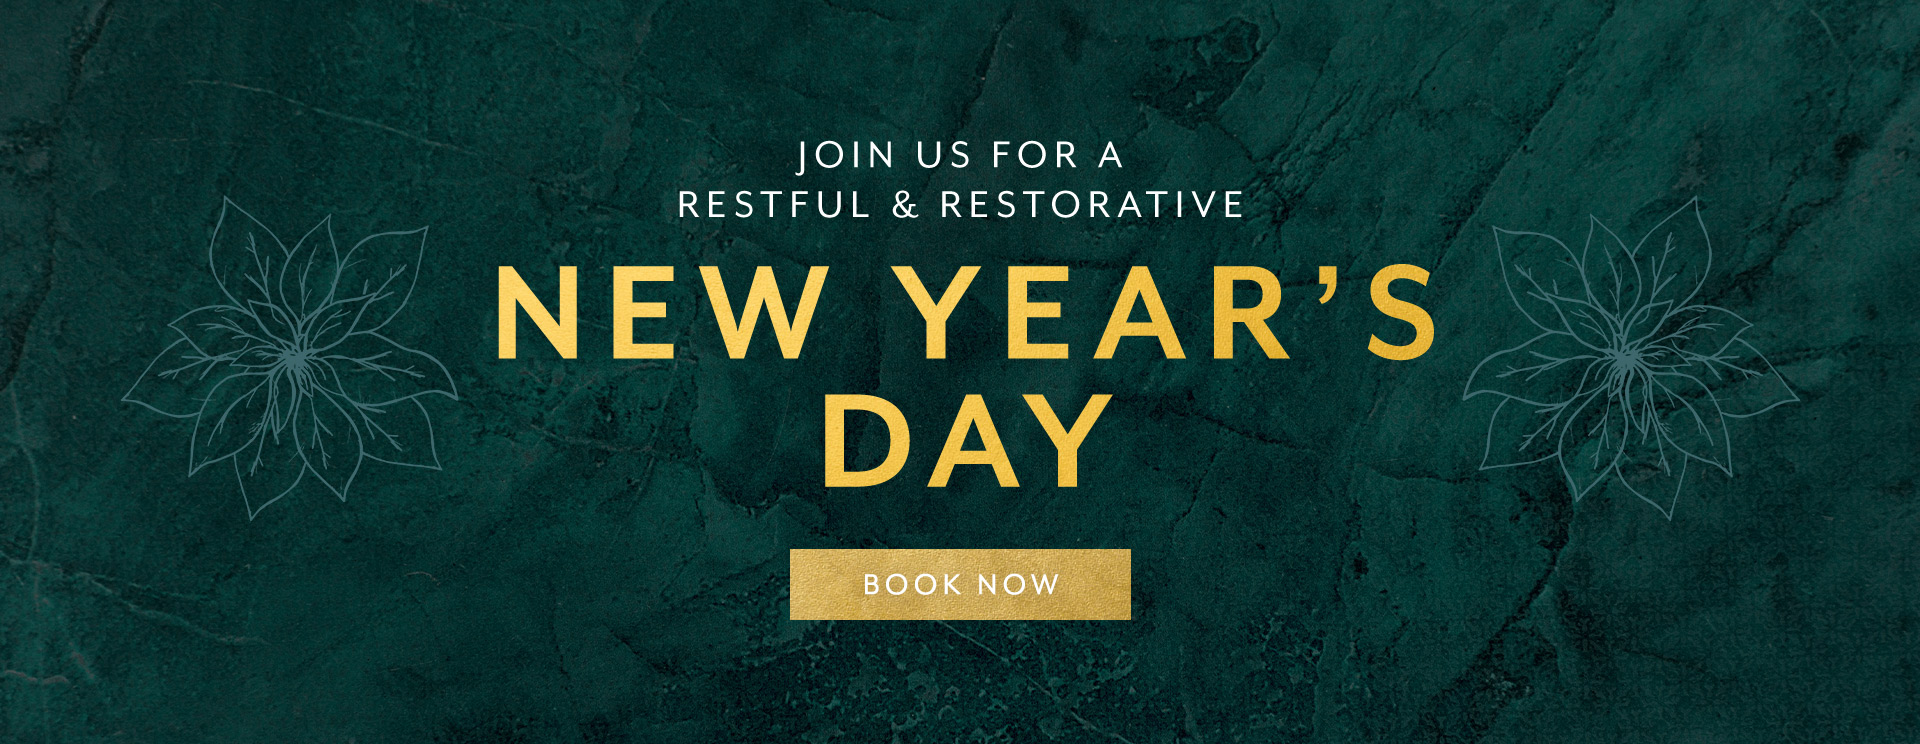 New Year's Day at The Belvedere Arms